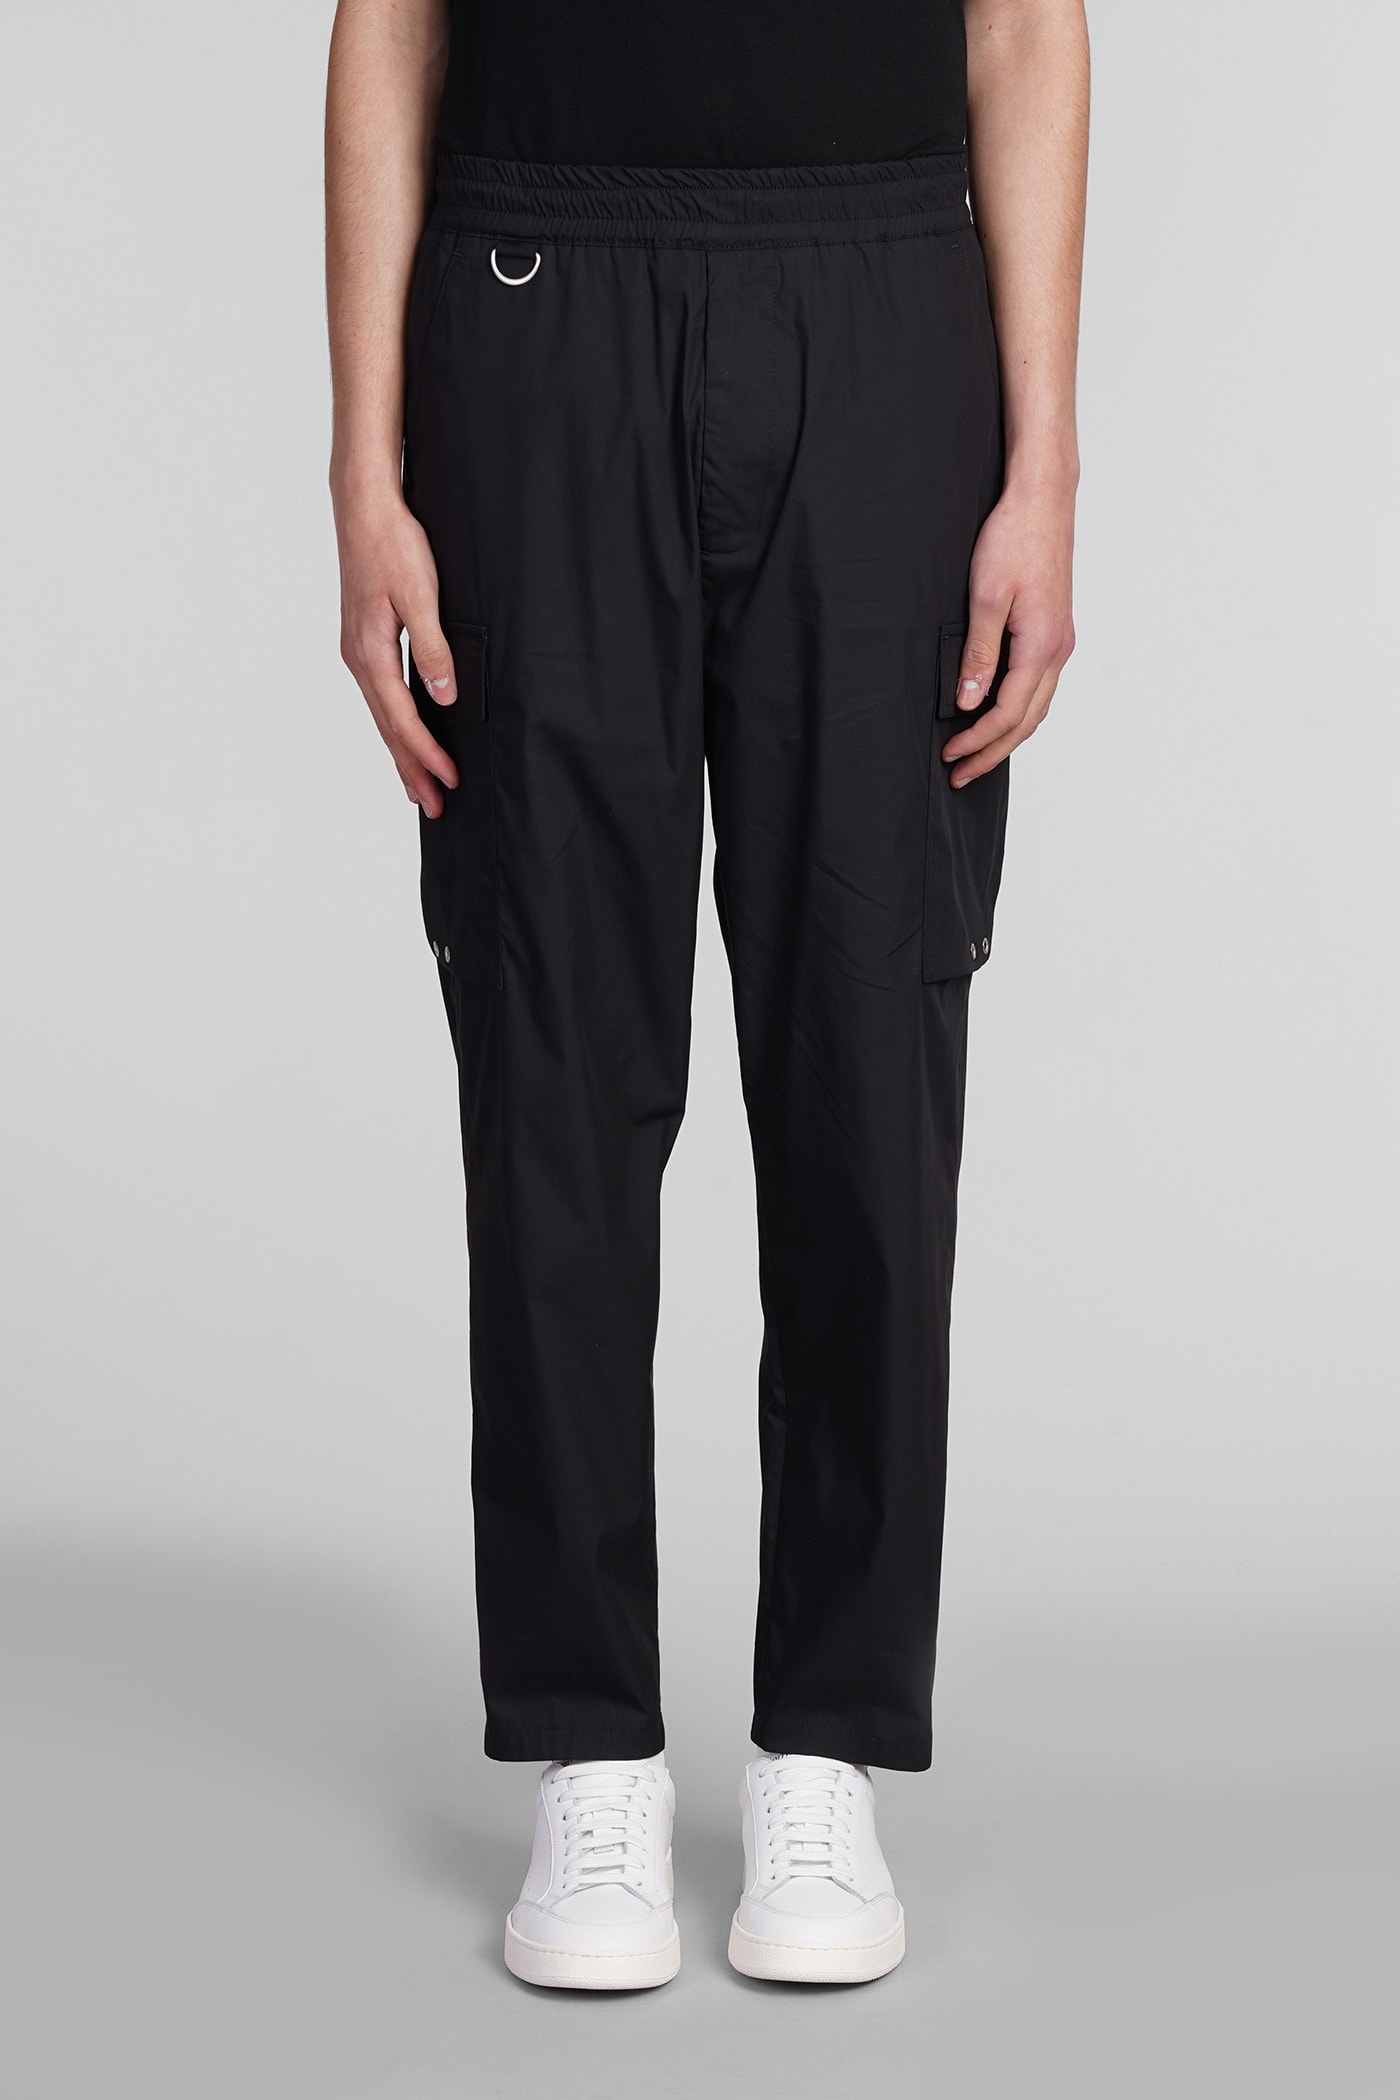 Combo Pants In Black Cotton